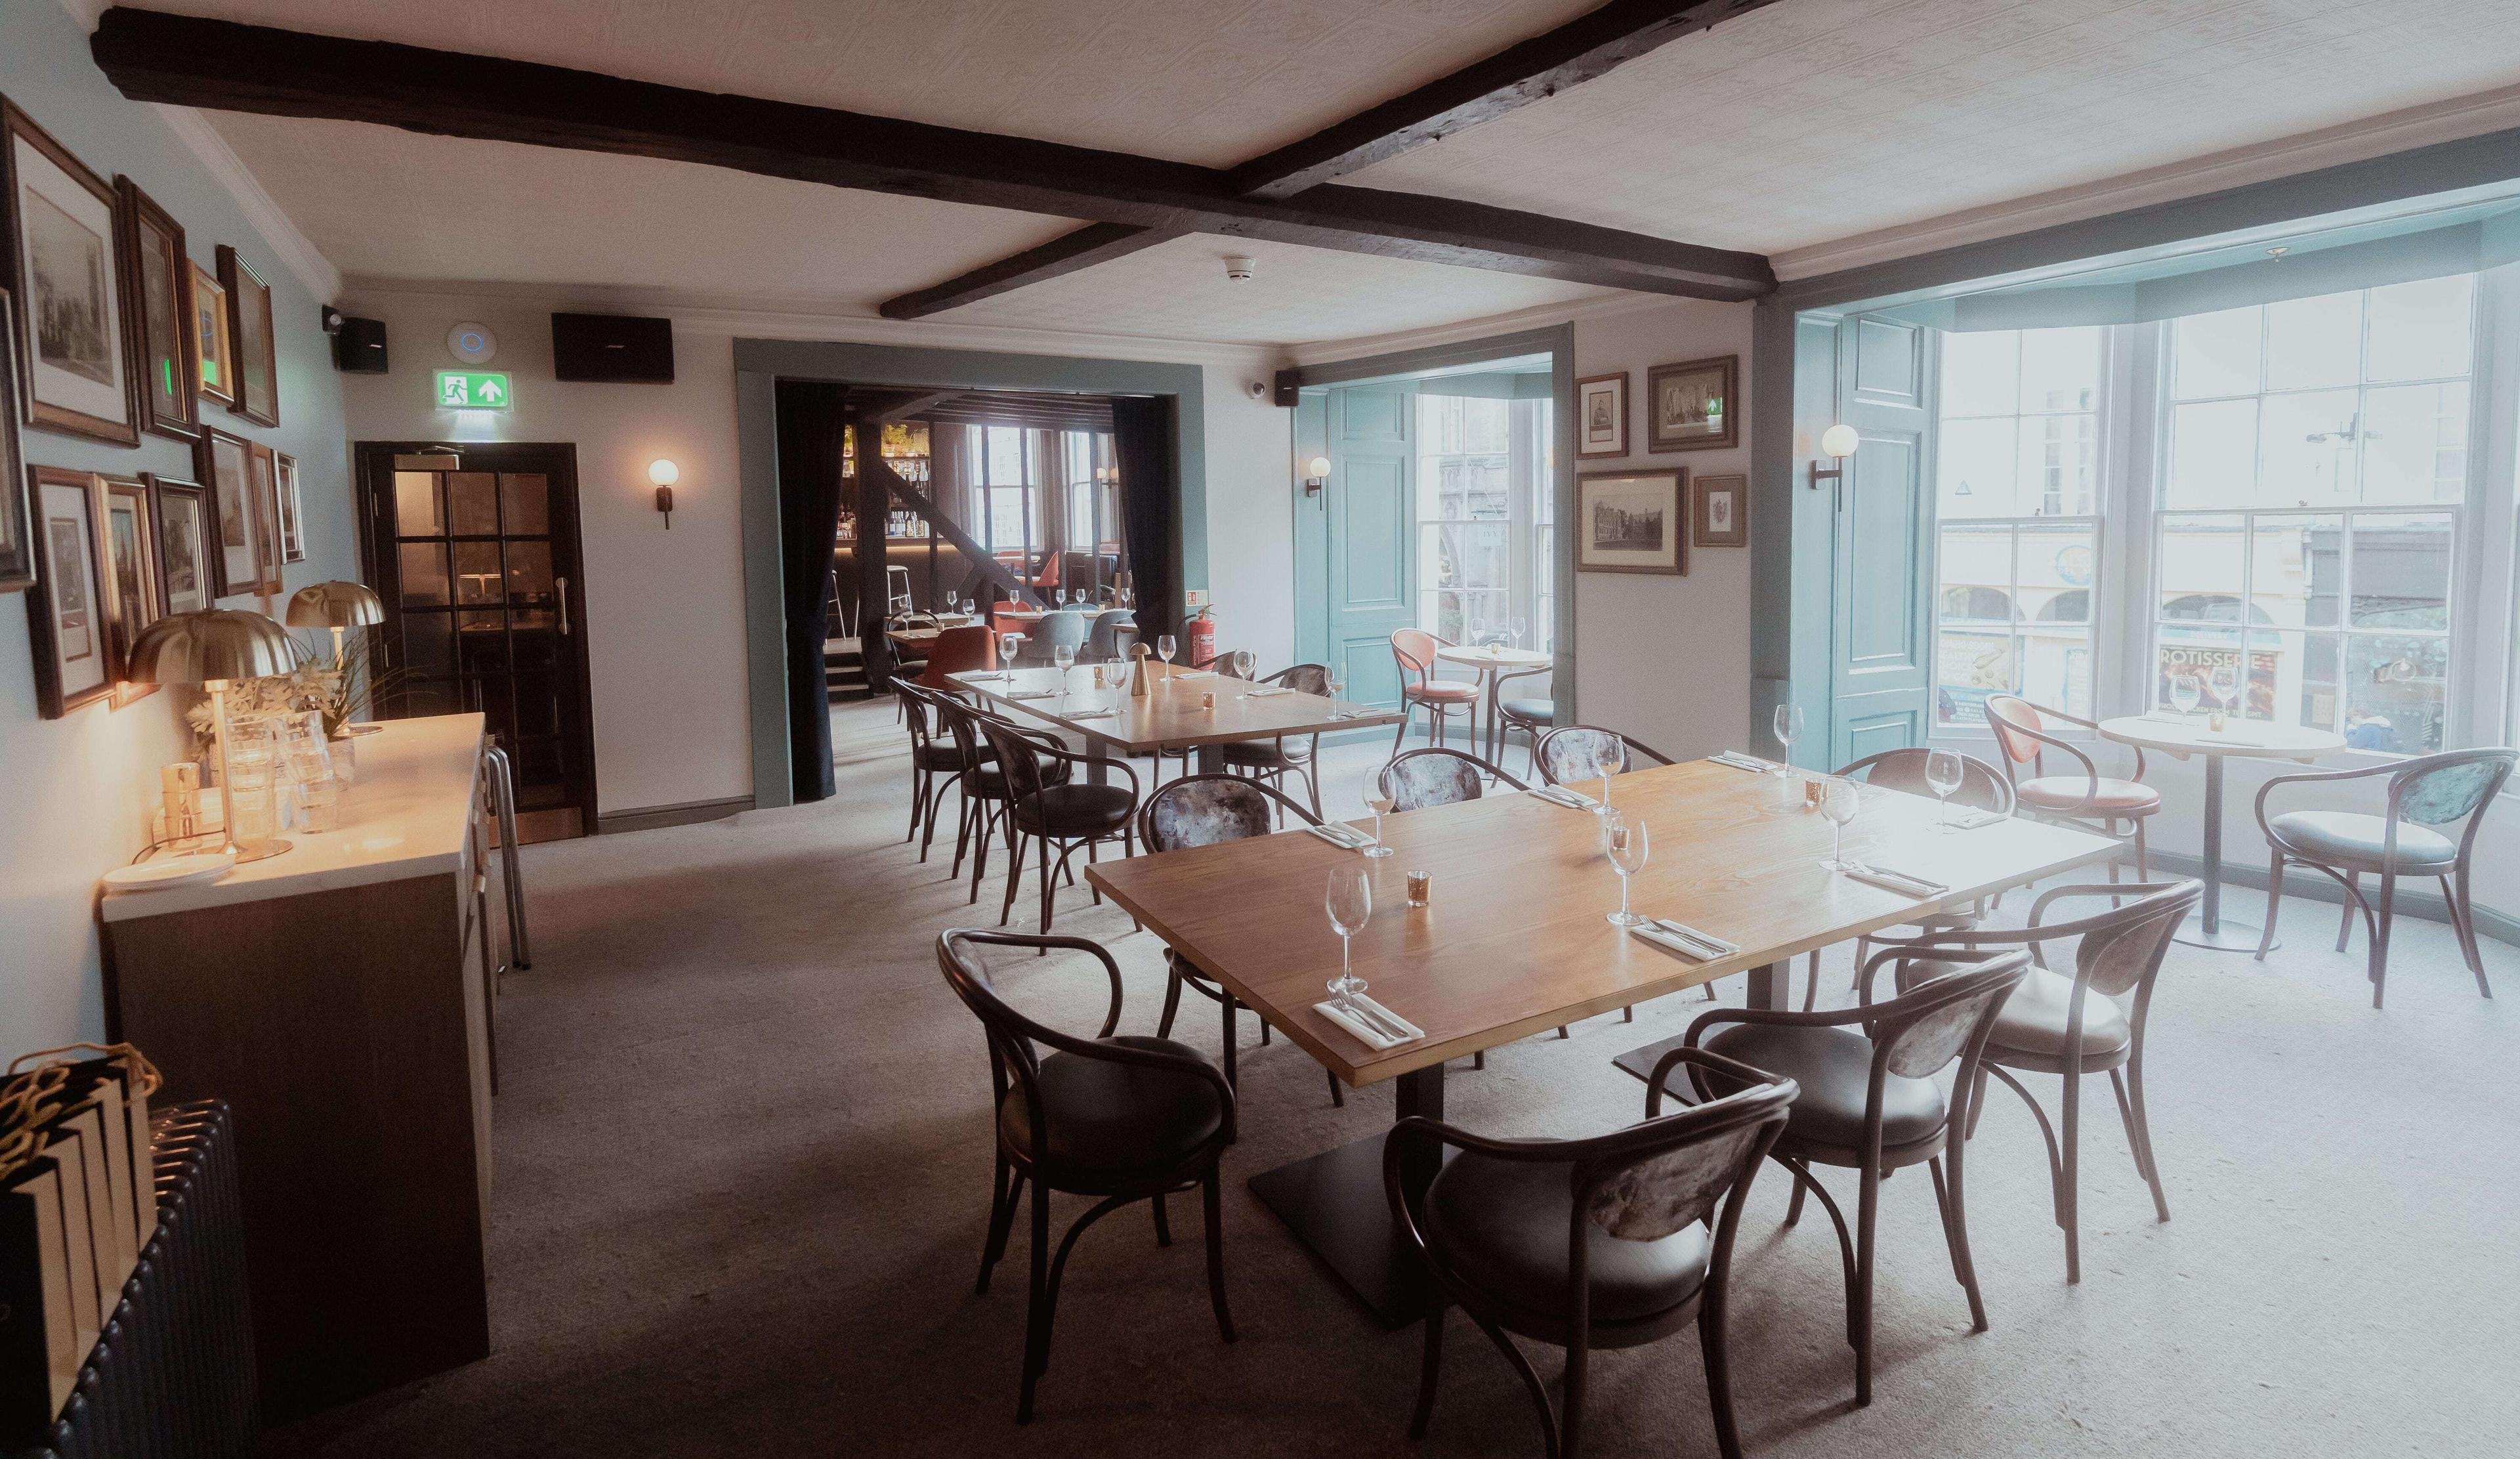 Private Dining Room - The Mitre Room , Gusto Oxford photo #2